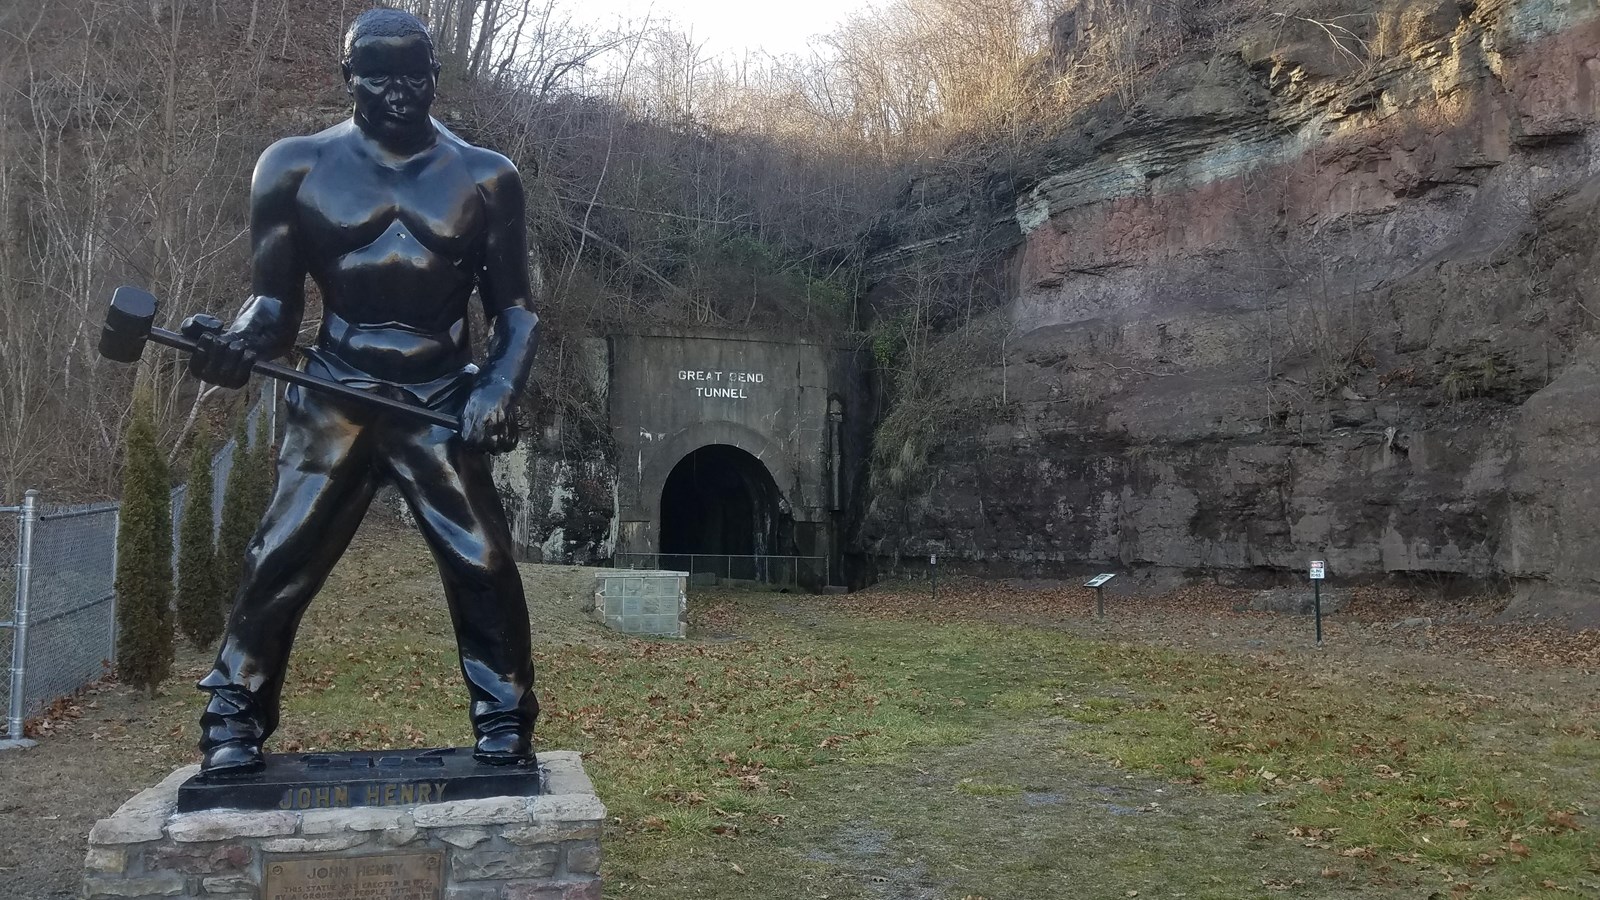 A statue of John Henry stands in front of a railroad tunnel 